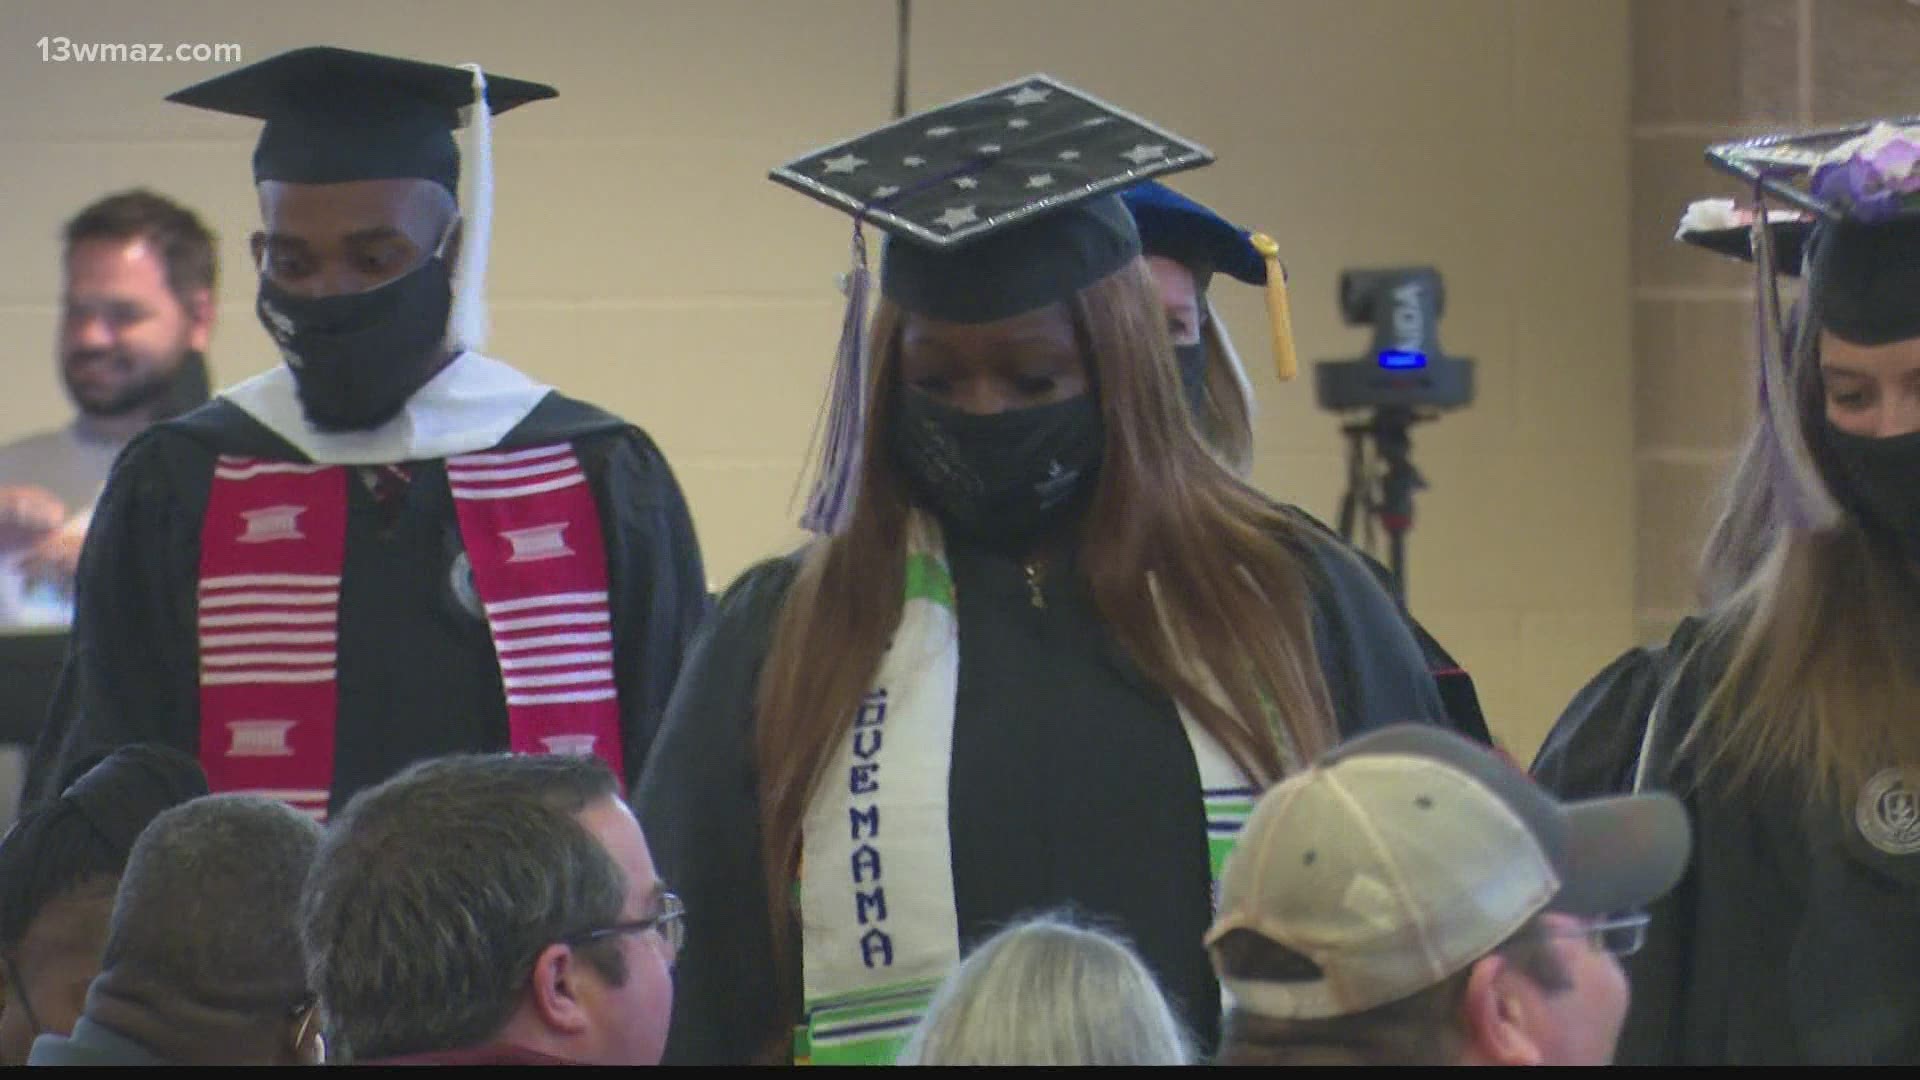 Wednesday, students at Middle Georgia State University got to march in their graduation ceremonies.